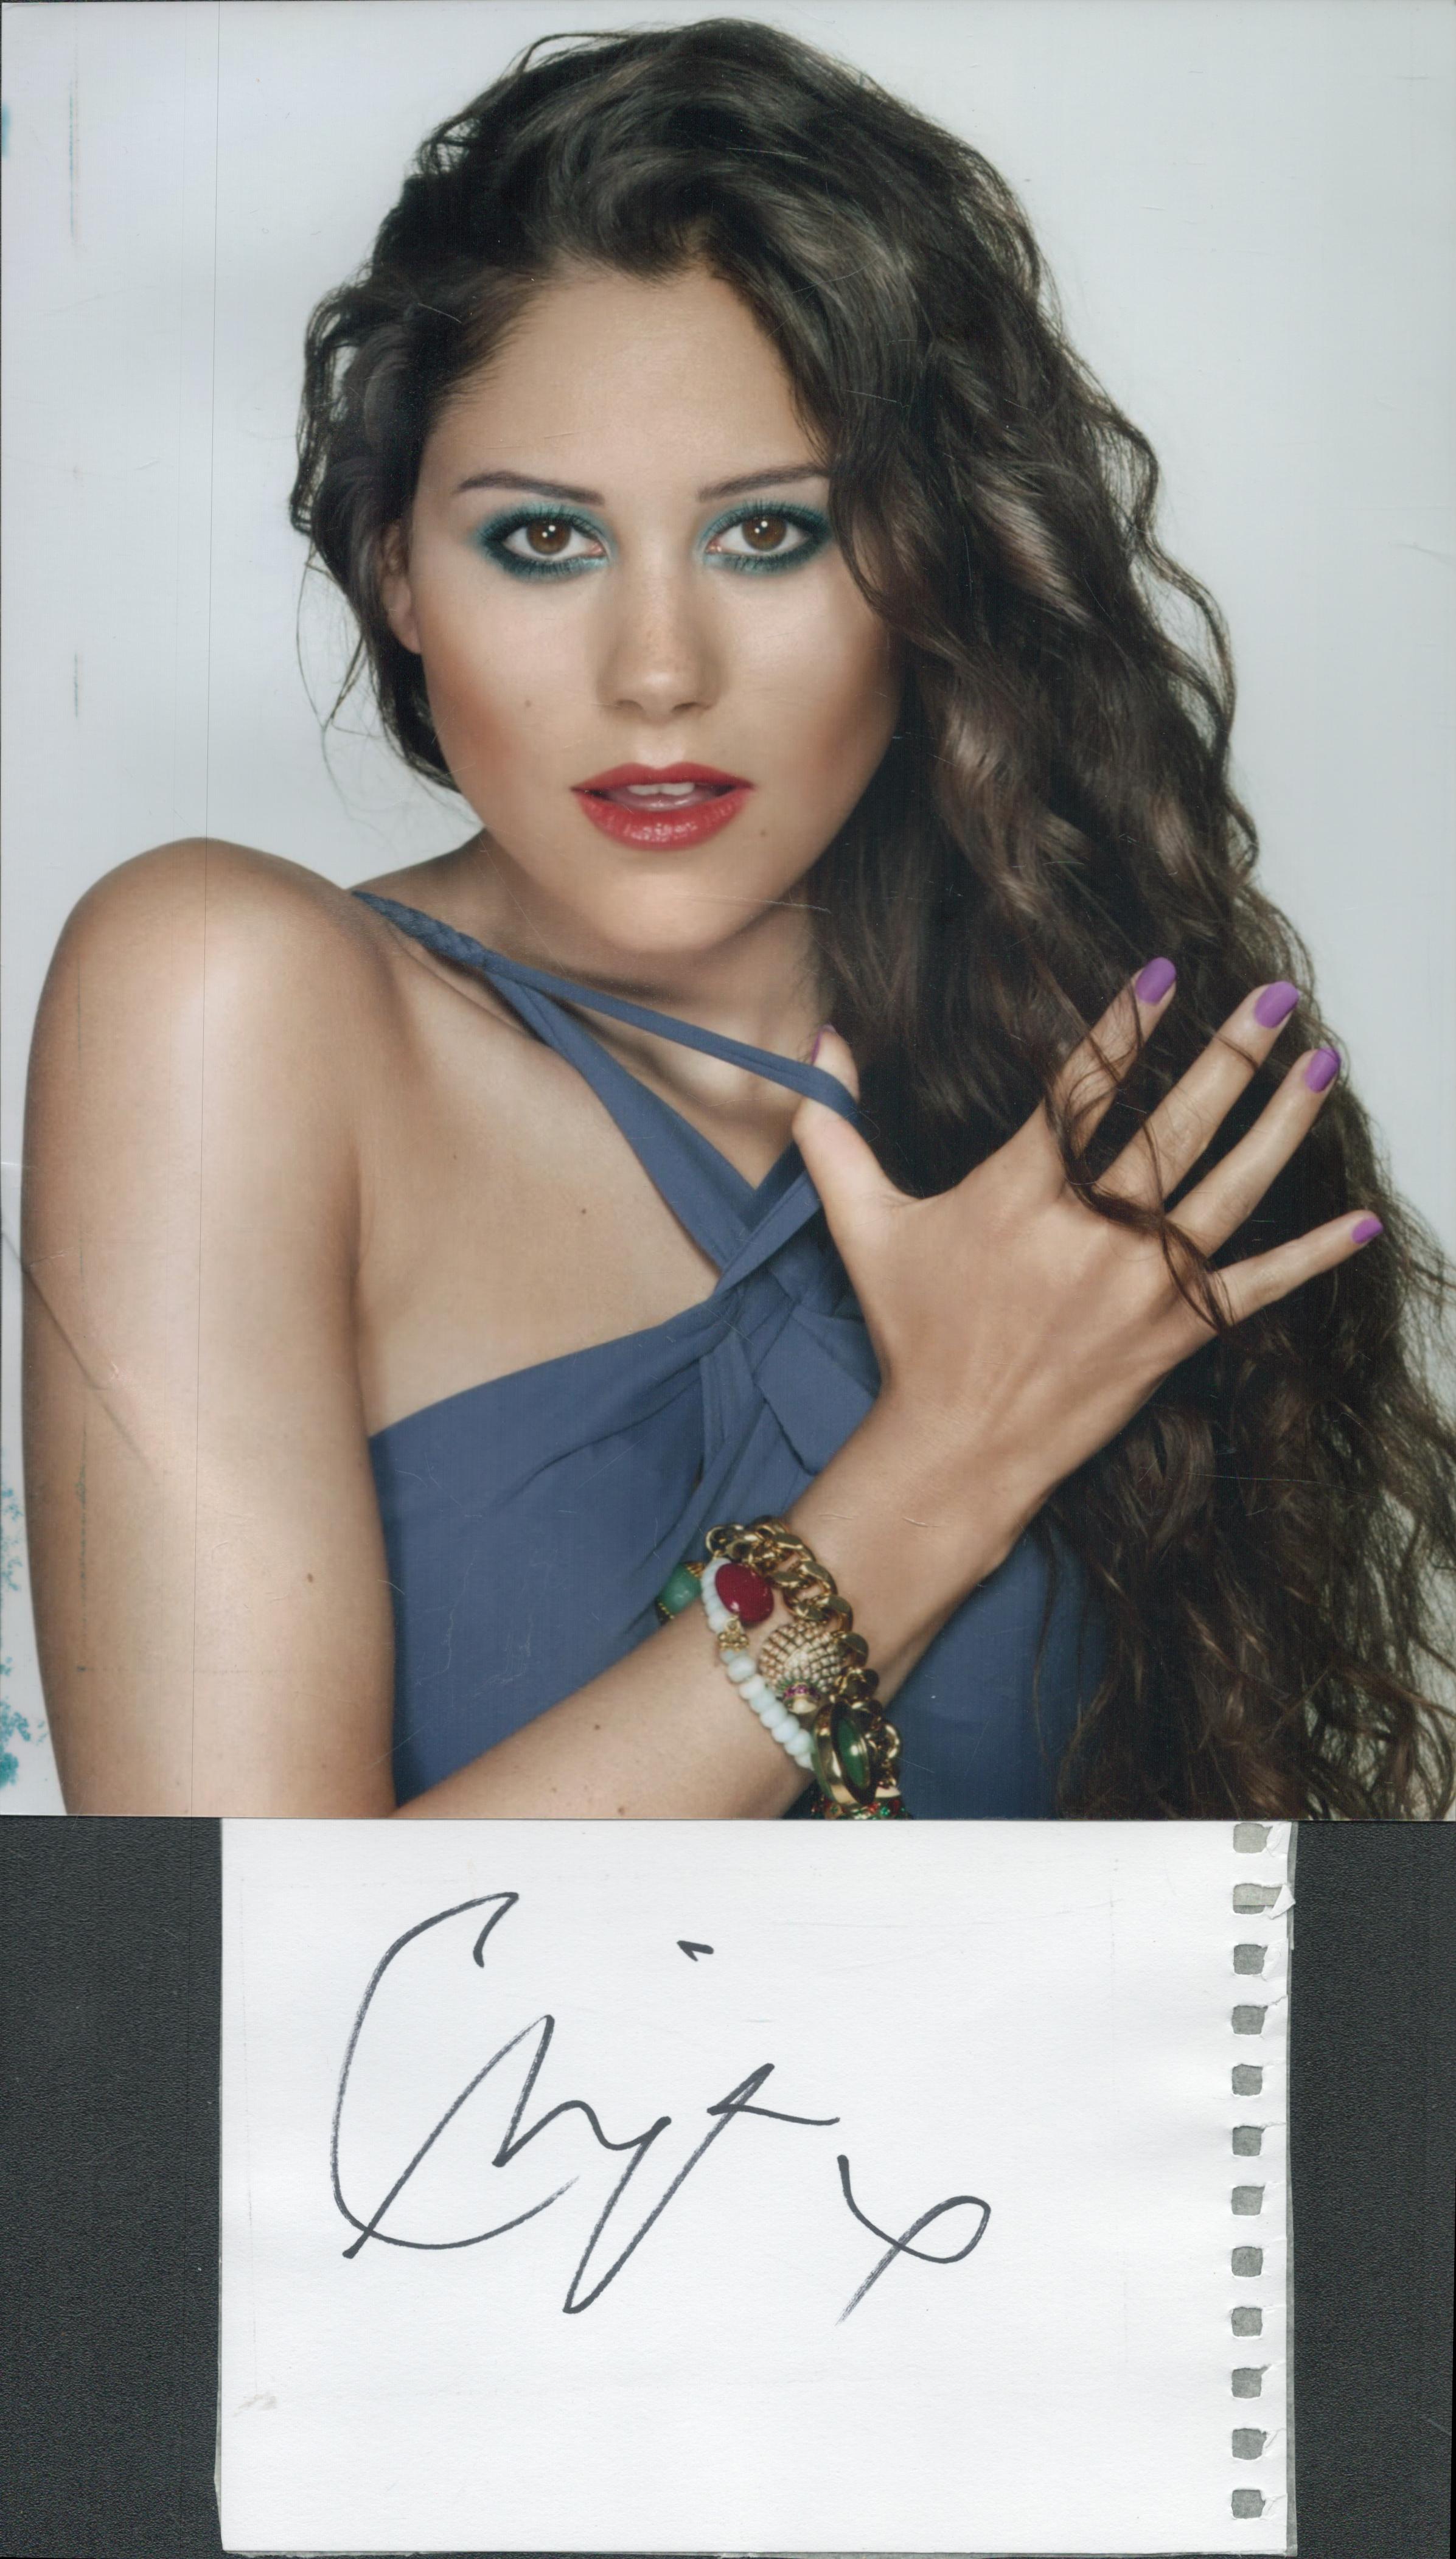 Eliza Doolittle signed 6x4 inch white card and 10x8 inch colour photo. Good condition. All